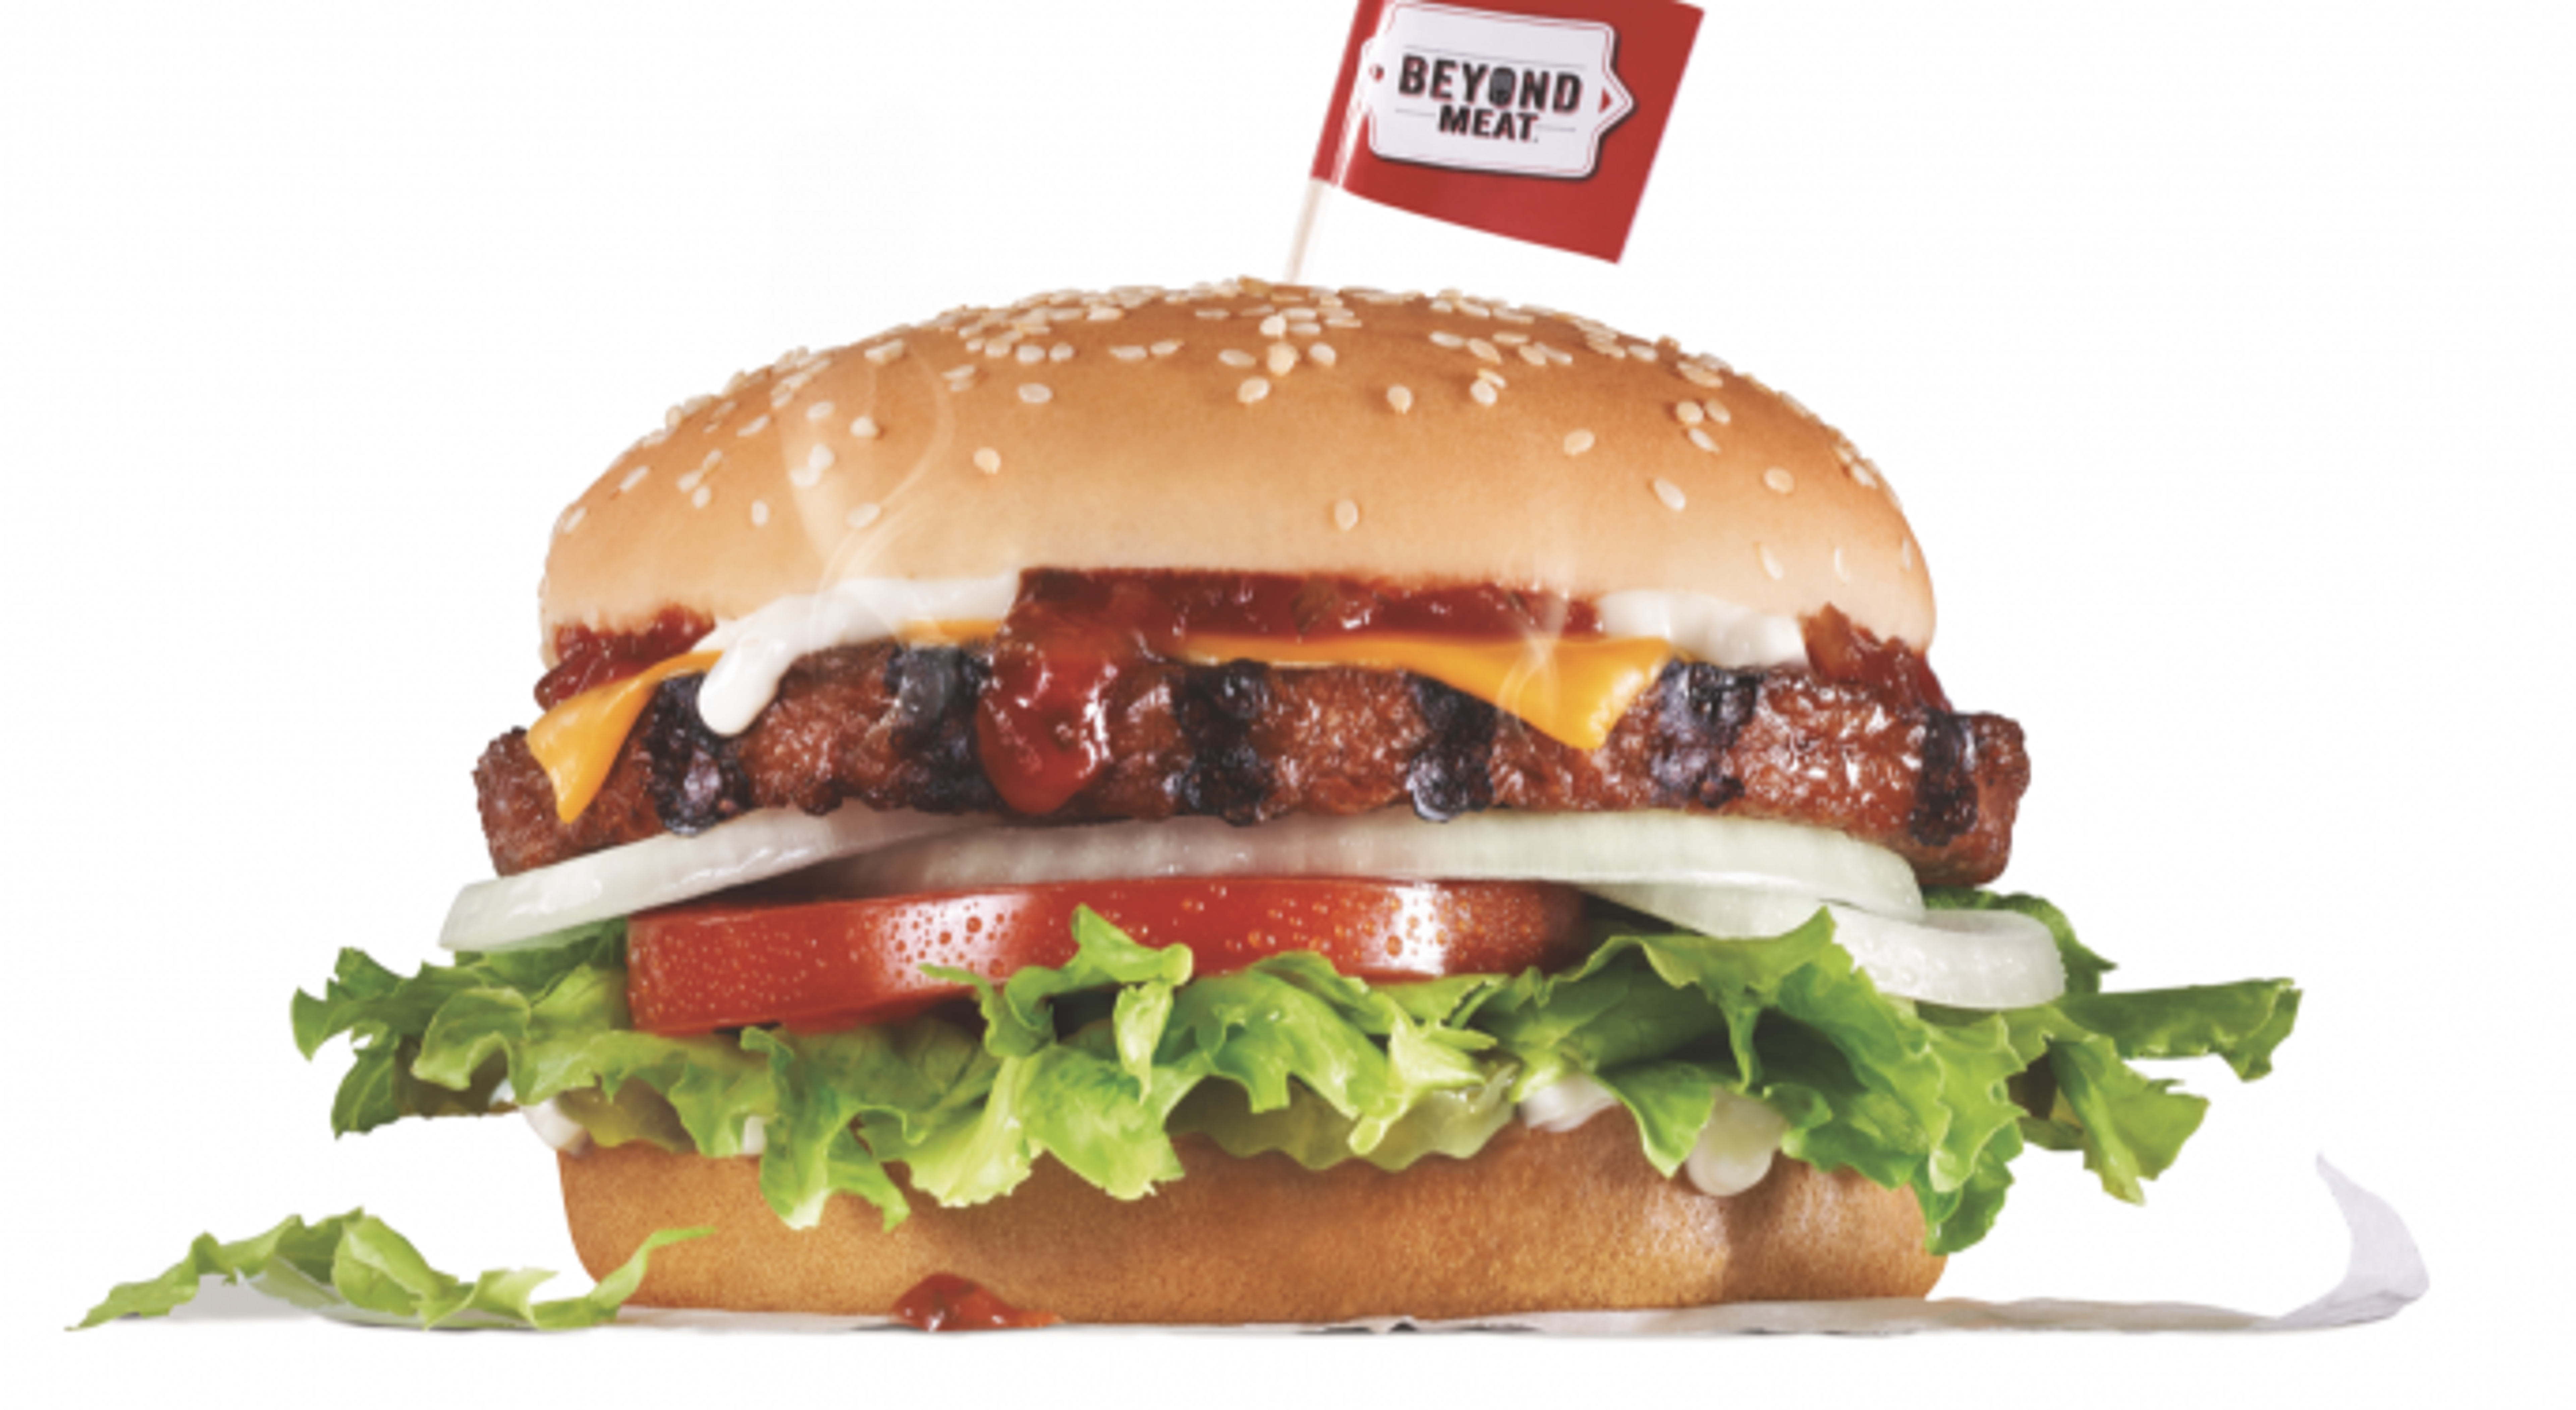 Beyond Meat Analysts Debate If The Stock Now Has Big Opportunity Or Major Headwinds